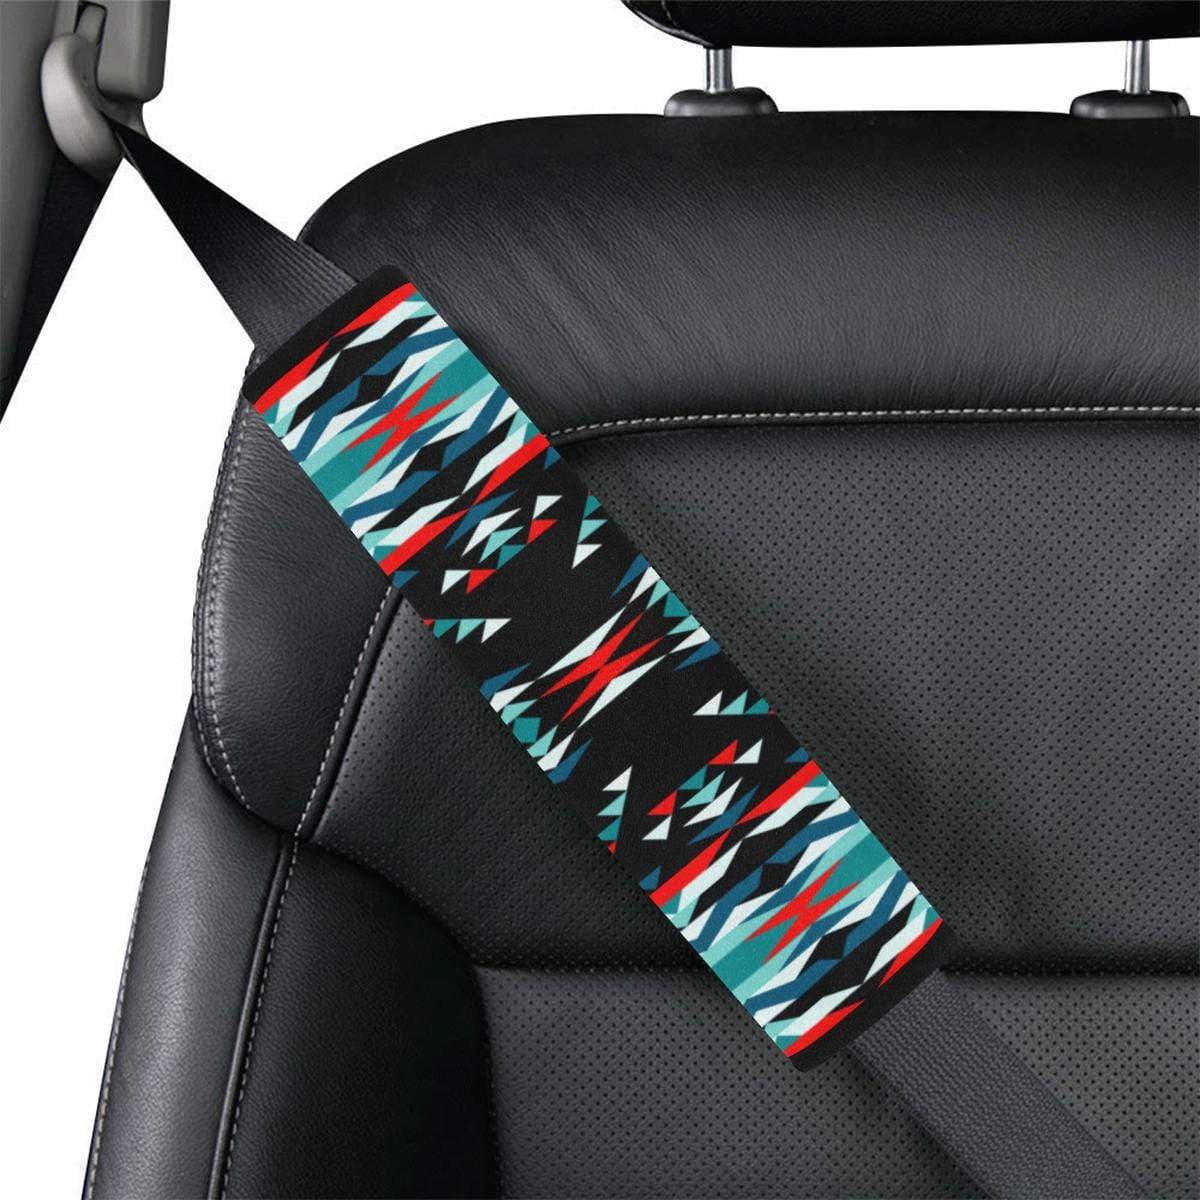 Visions of Peaceful Nights Car Seat Belt Cover 7''x12.6'' Car Seat Belt Cover 7''x12.6'' e-joyer 